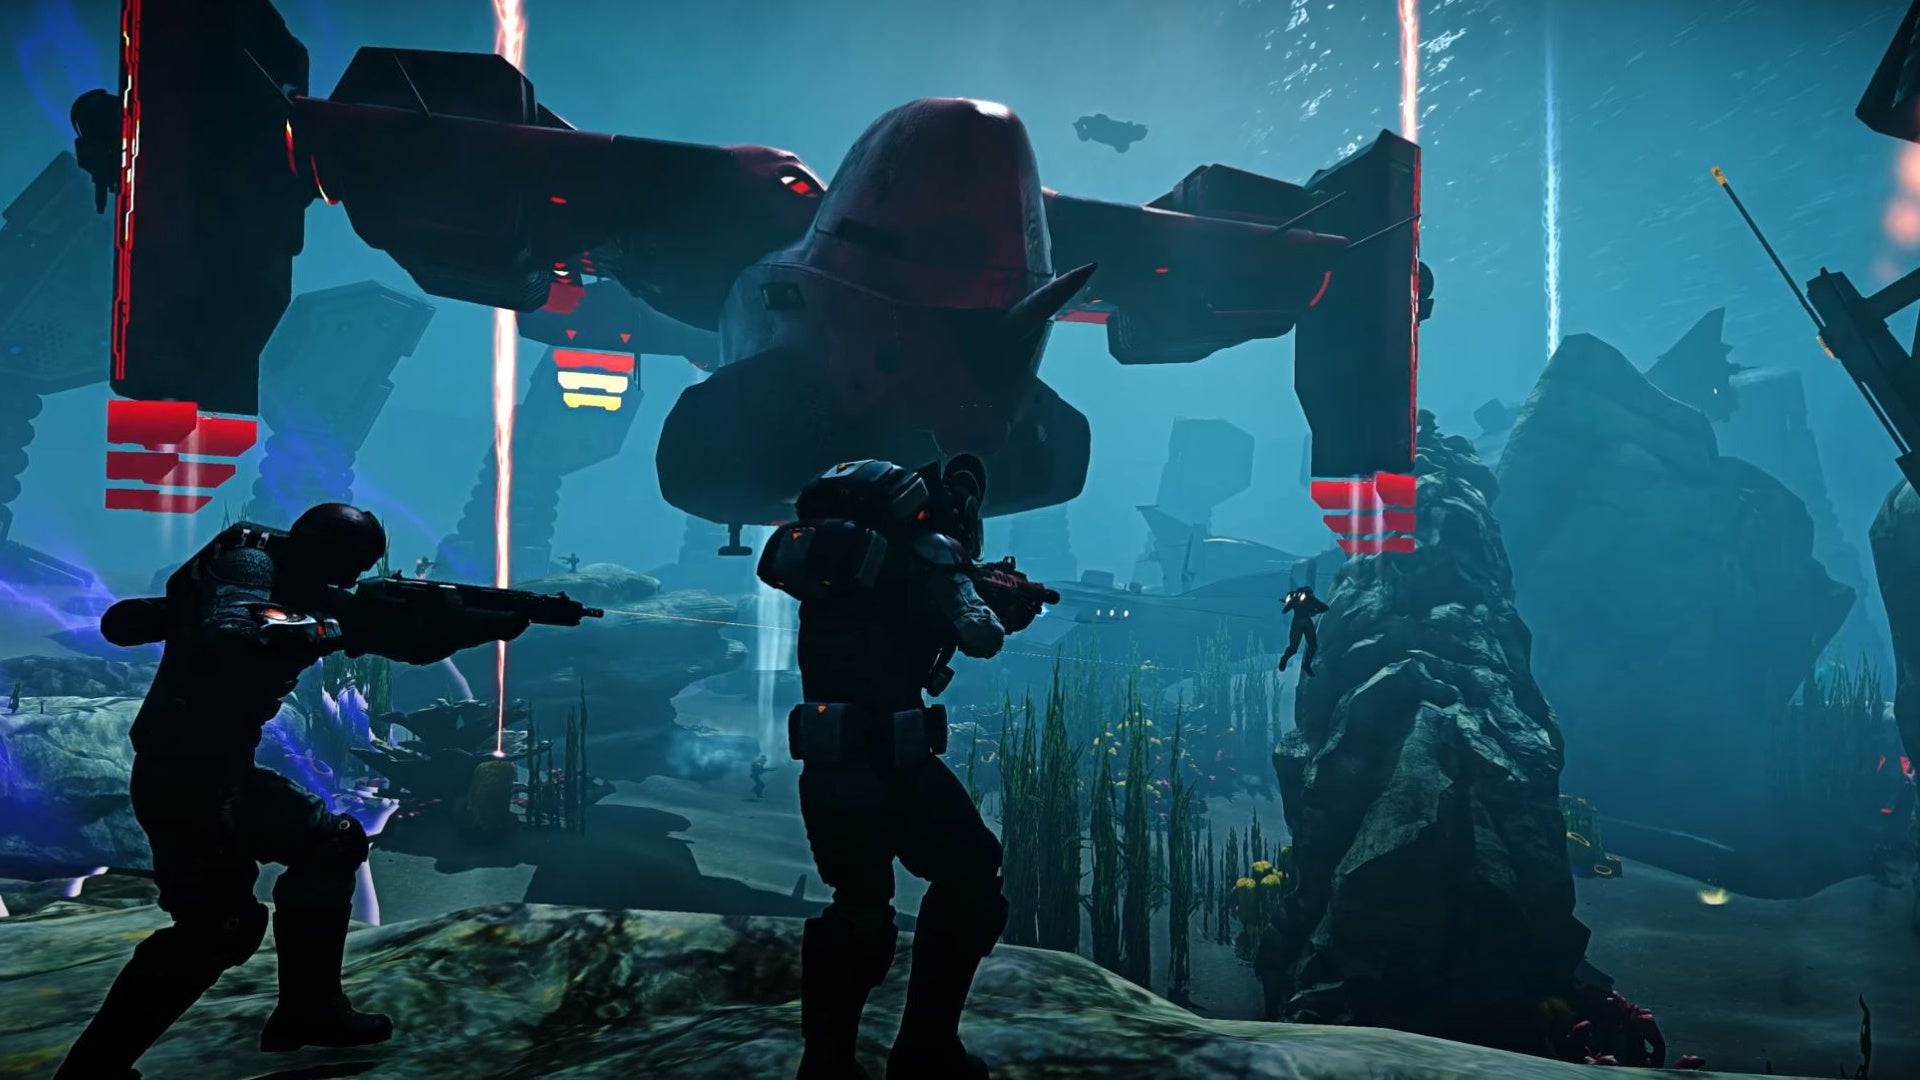 MMO FPS Planetside 2 has overhauled its underwater combat as part of July's Surf and Storm update.